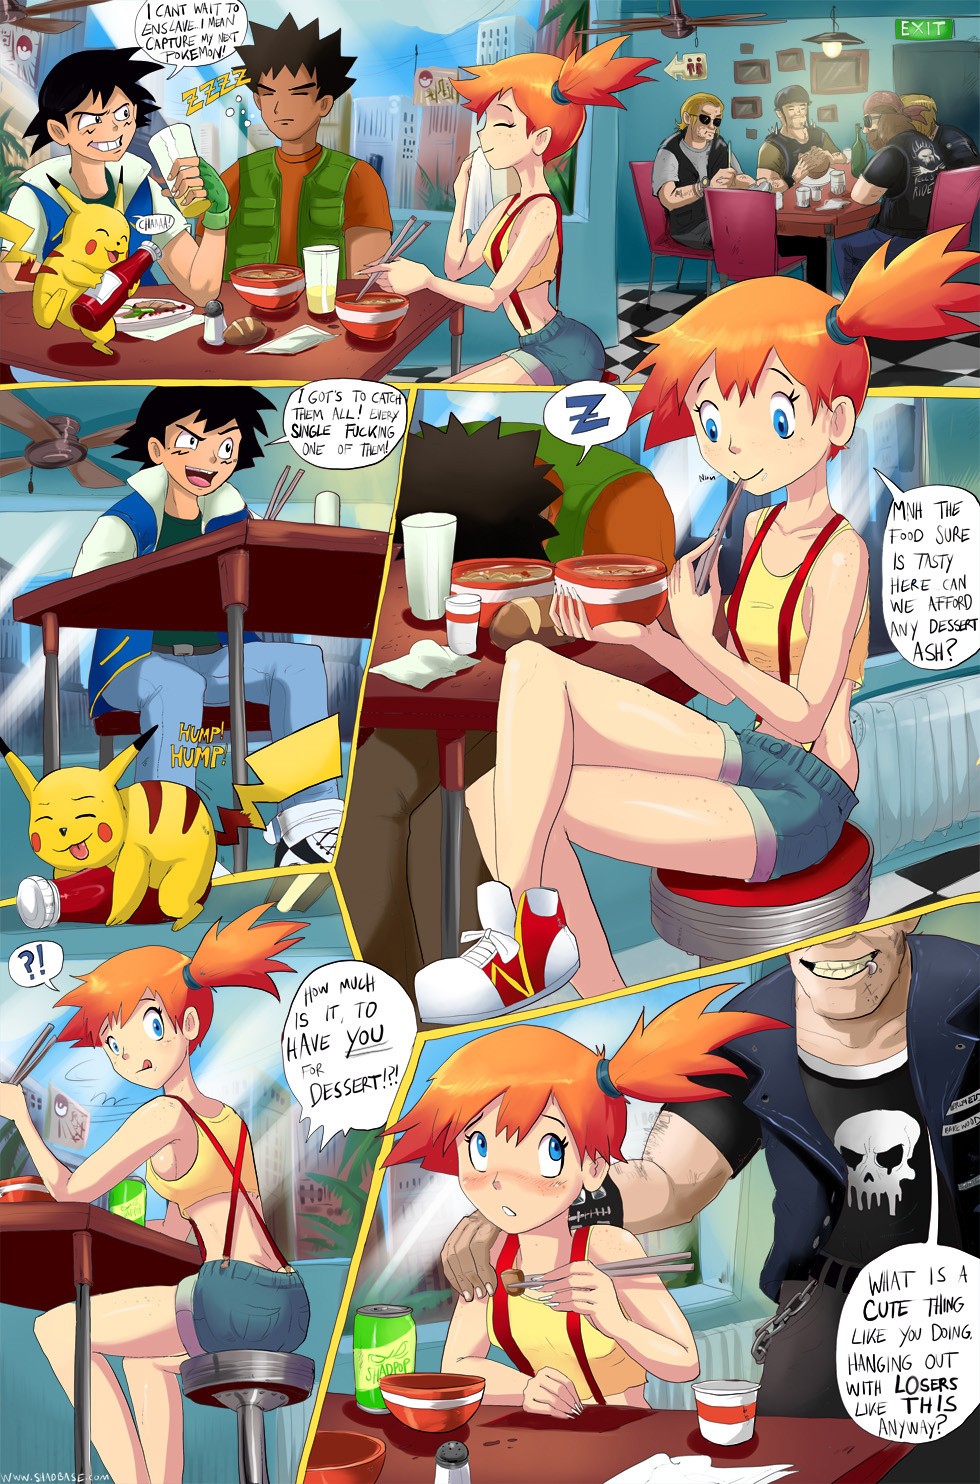 Misty Gets Wet hentai manga picture 2